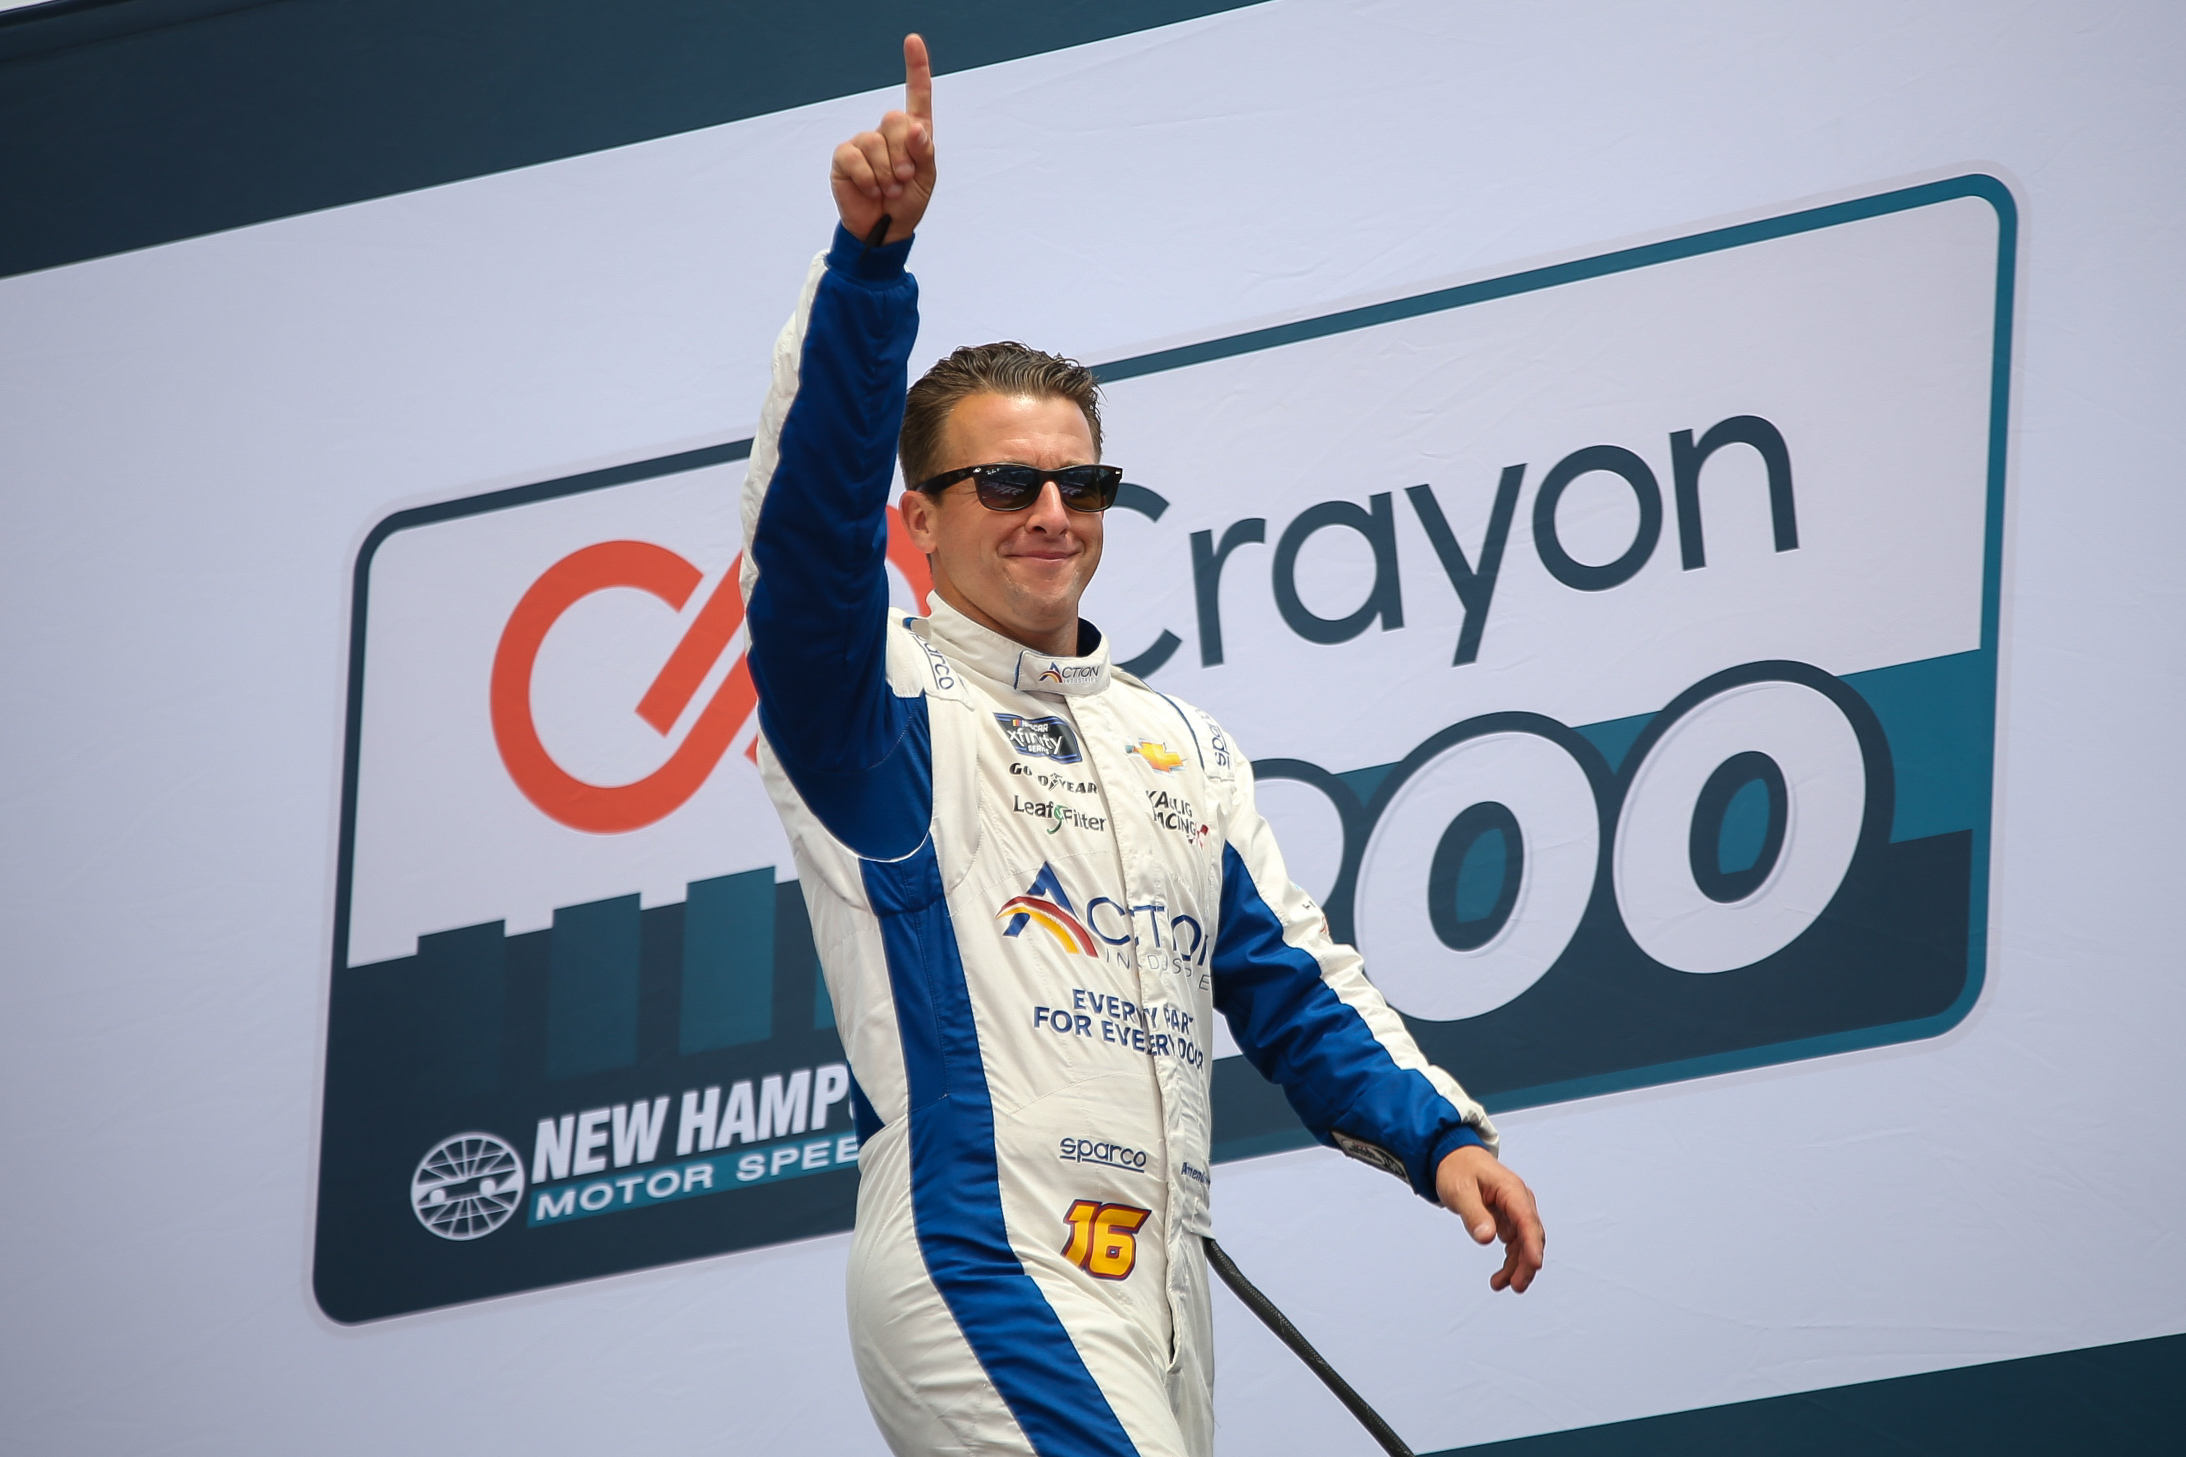 Who says Allmendinger isn't a cool character in NASCAR? (Photo: Sam Draiss | The Podium Finish)